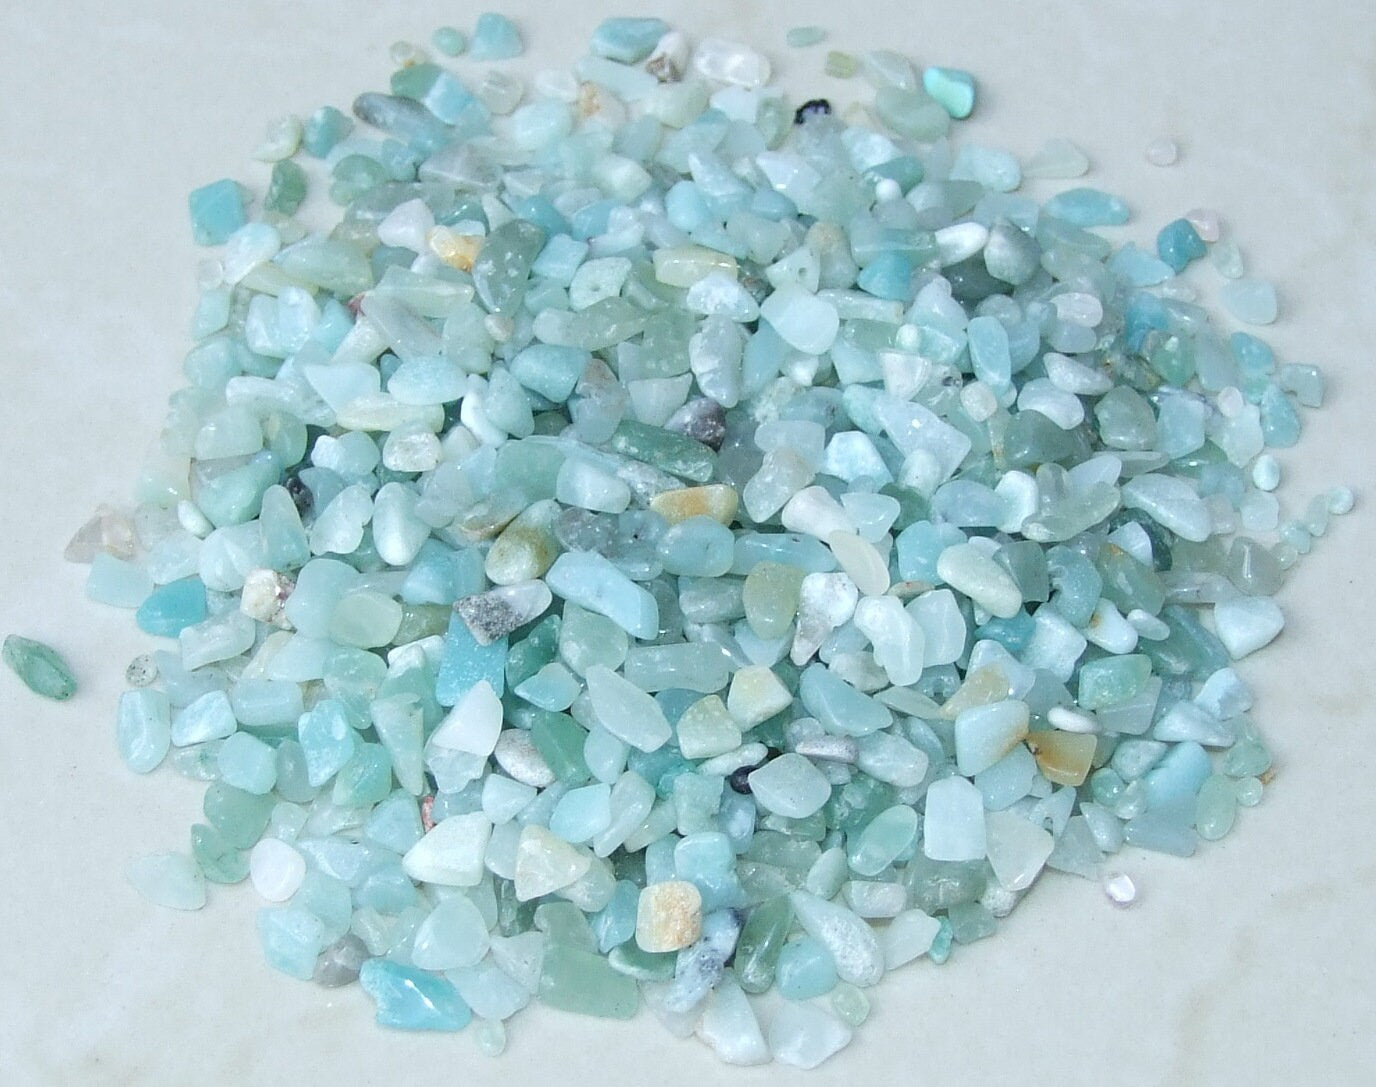 Tiny Polished Gemstone Chips, Small Natural Quartz Crystal Chips, Undrilled Gemstone Beads, Loose Bulk Jewelry Stones, 1.5 oz, 2mm to 7mm